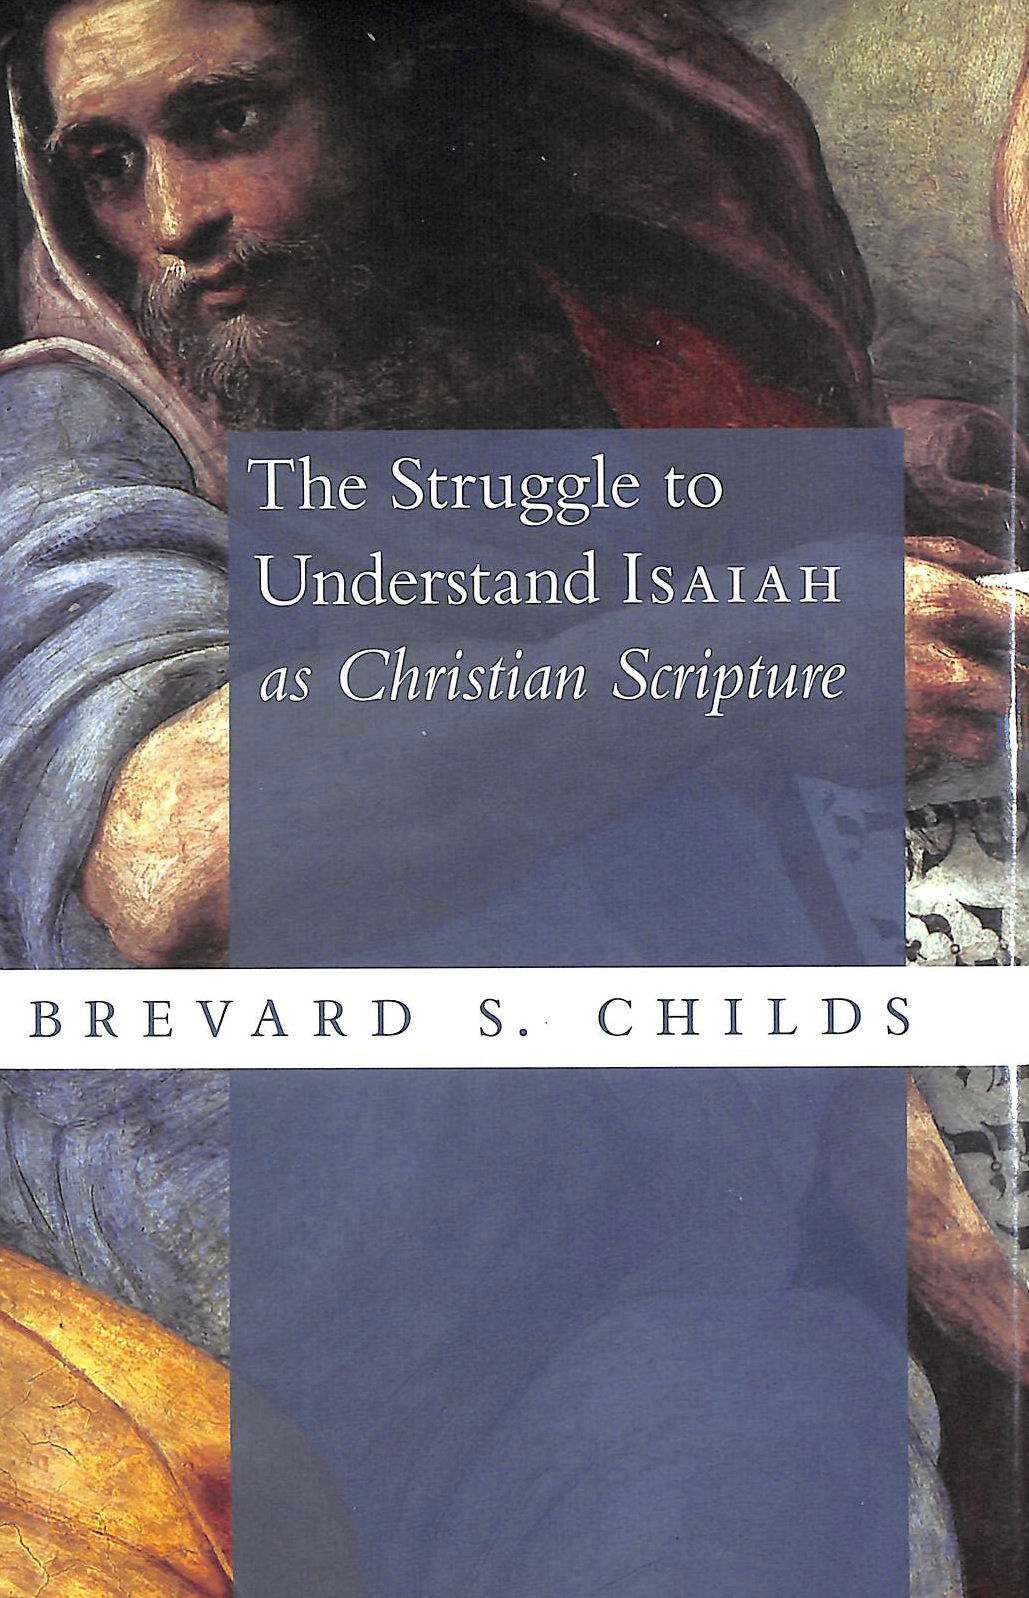 BREVARD S CHILDS - Struggle to Understand Isaiah as Ch